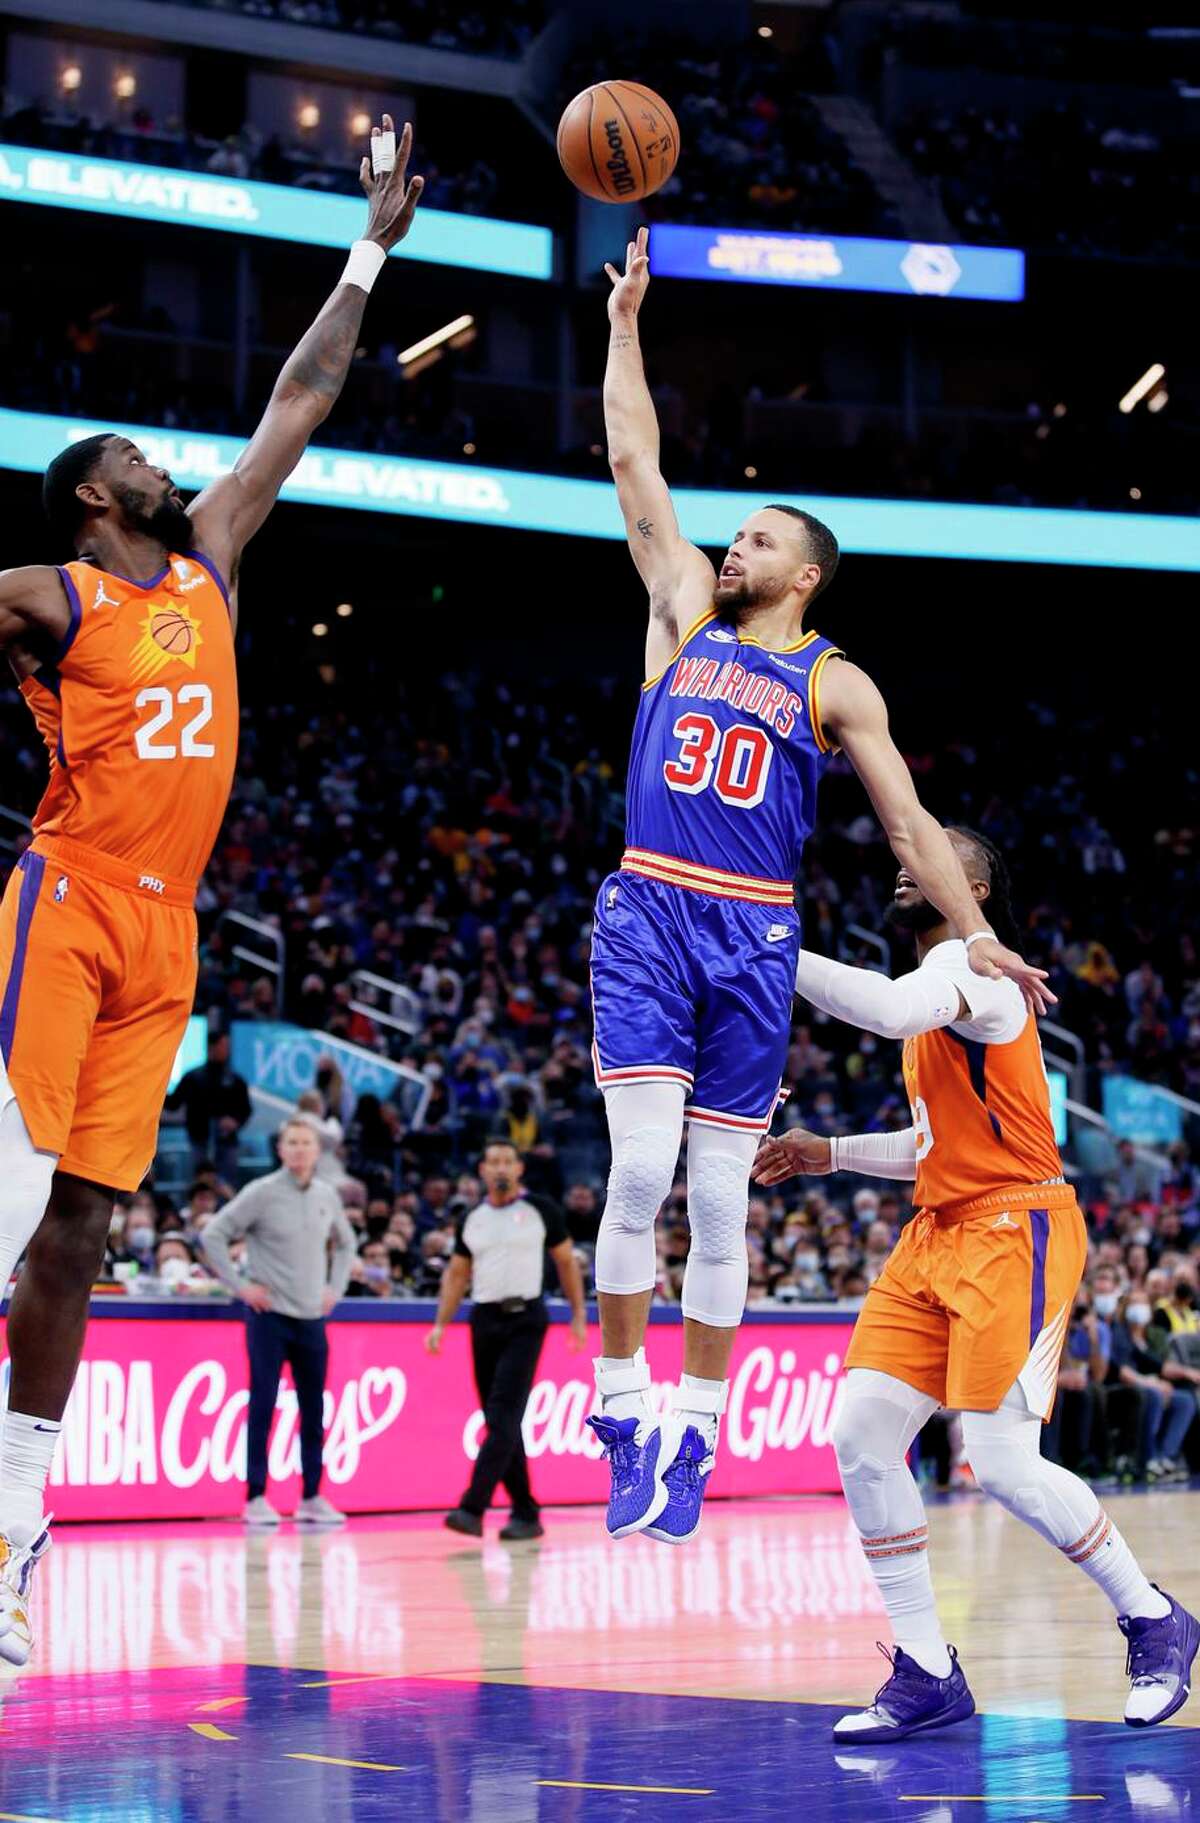 Golden State Warriors guard Stephen Curry (30) shoots the ball over Phoenix Suns center Deandre Ayton (22) for the two-point score in the third quarter of an NBA game at Chase Center, Friday, Dec. 3, 2021, in San Francisco, Calif.